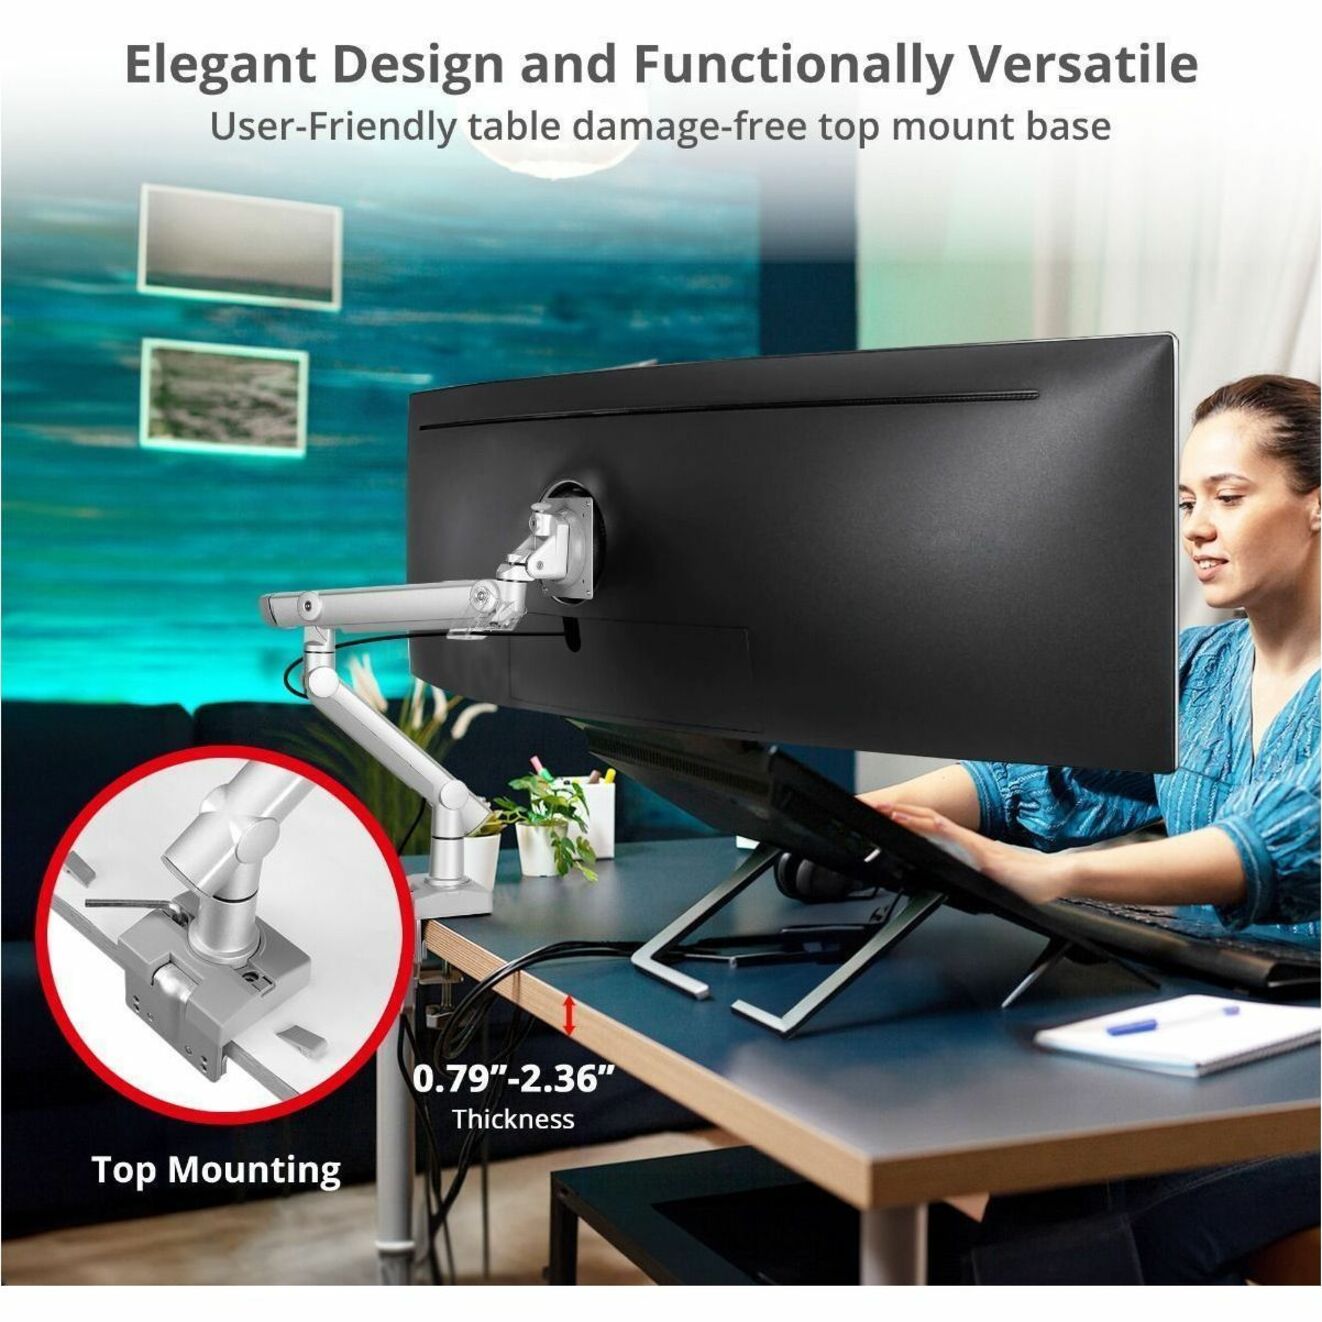 SIIG CE-MT3V11-S1 Heavy Duty Desk Mount Single Monitor Arm - Up to 49"